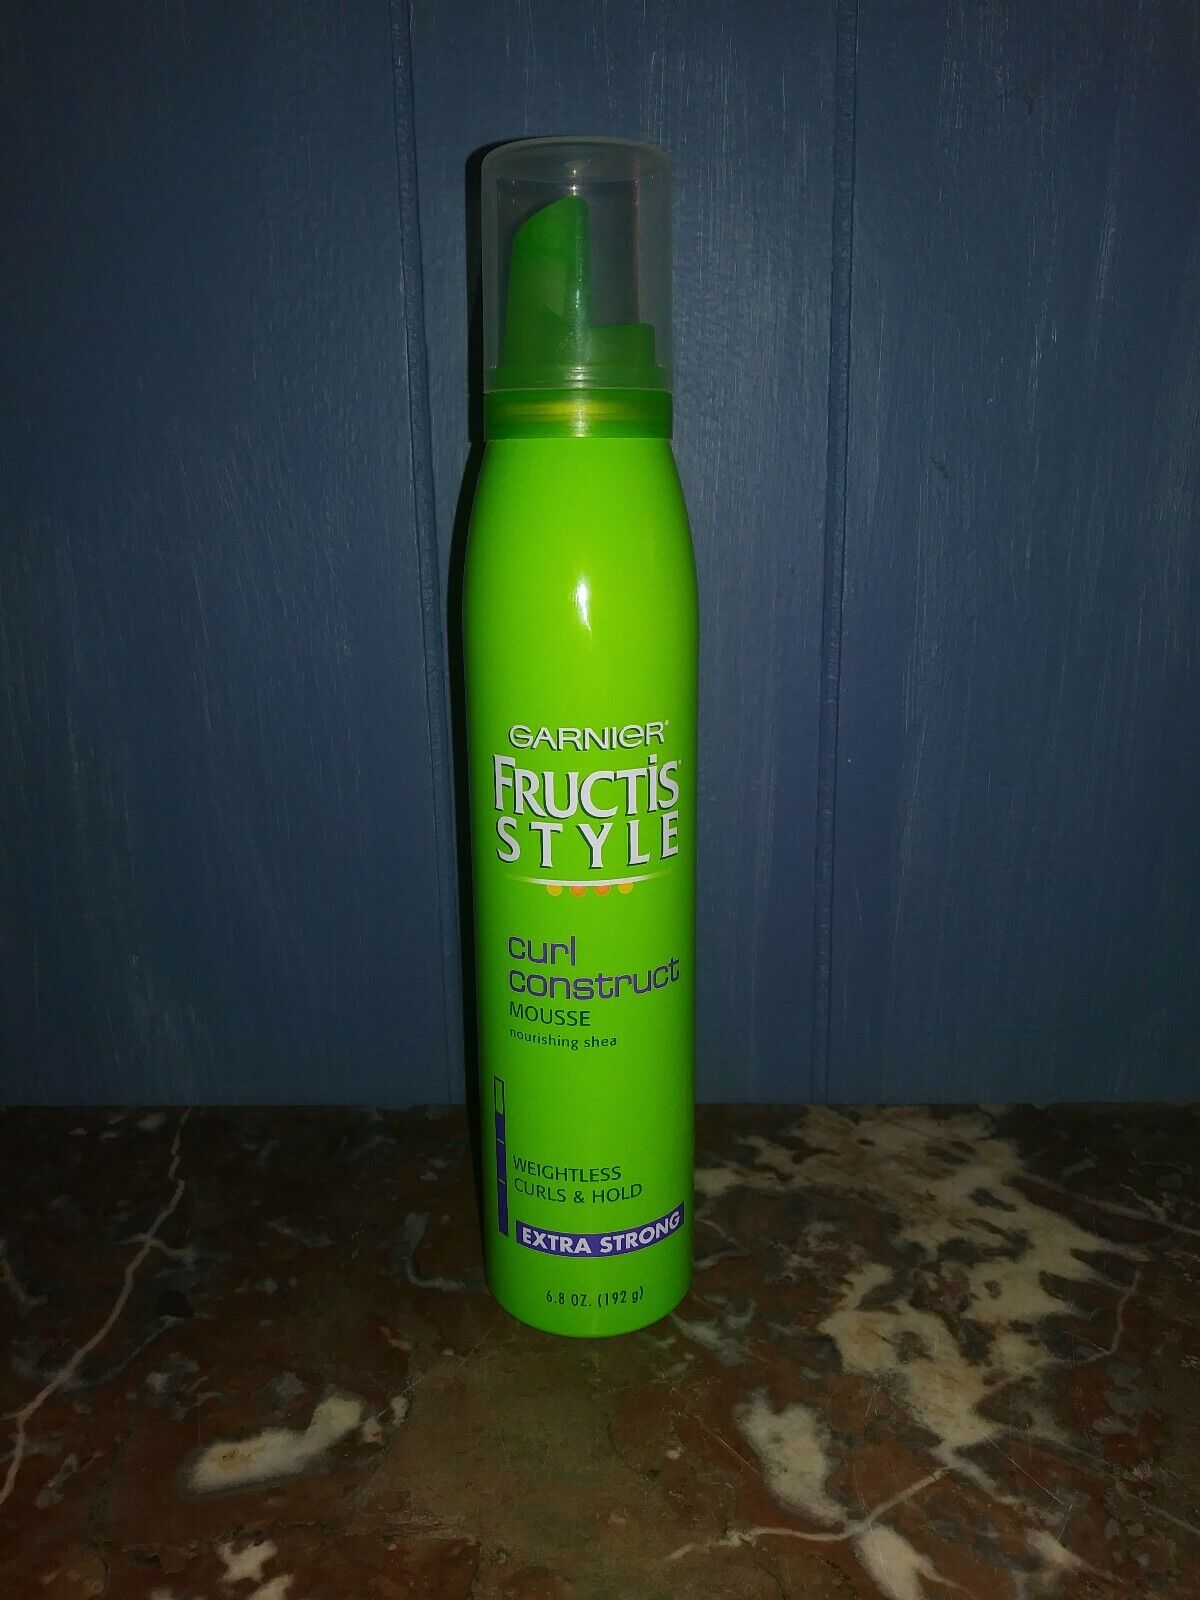 Garnier Fructis Curl Construct Mousse 6.8 81%OFF 新作揃え Extra oz Strong Hold